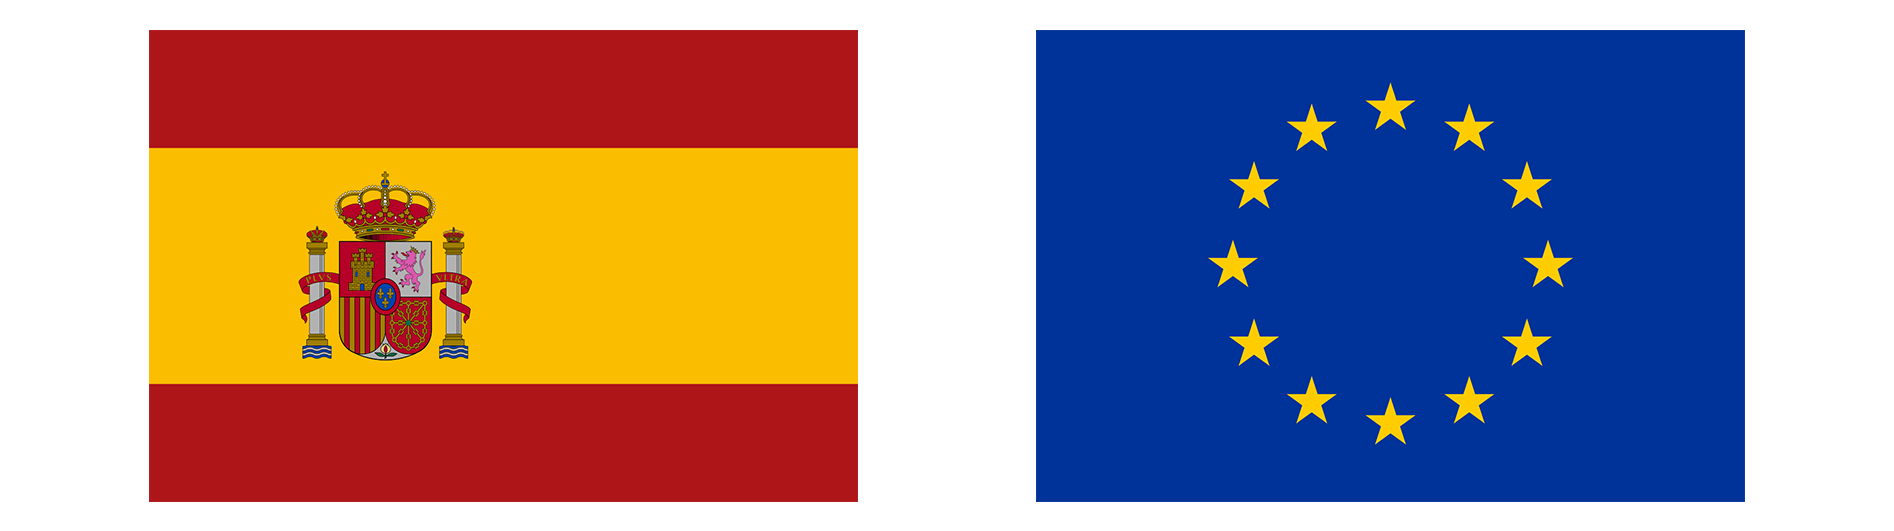 Flag of Spain and the European Union